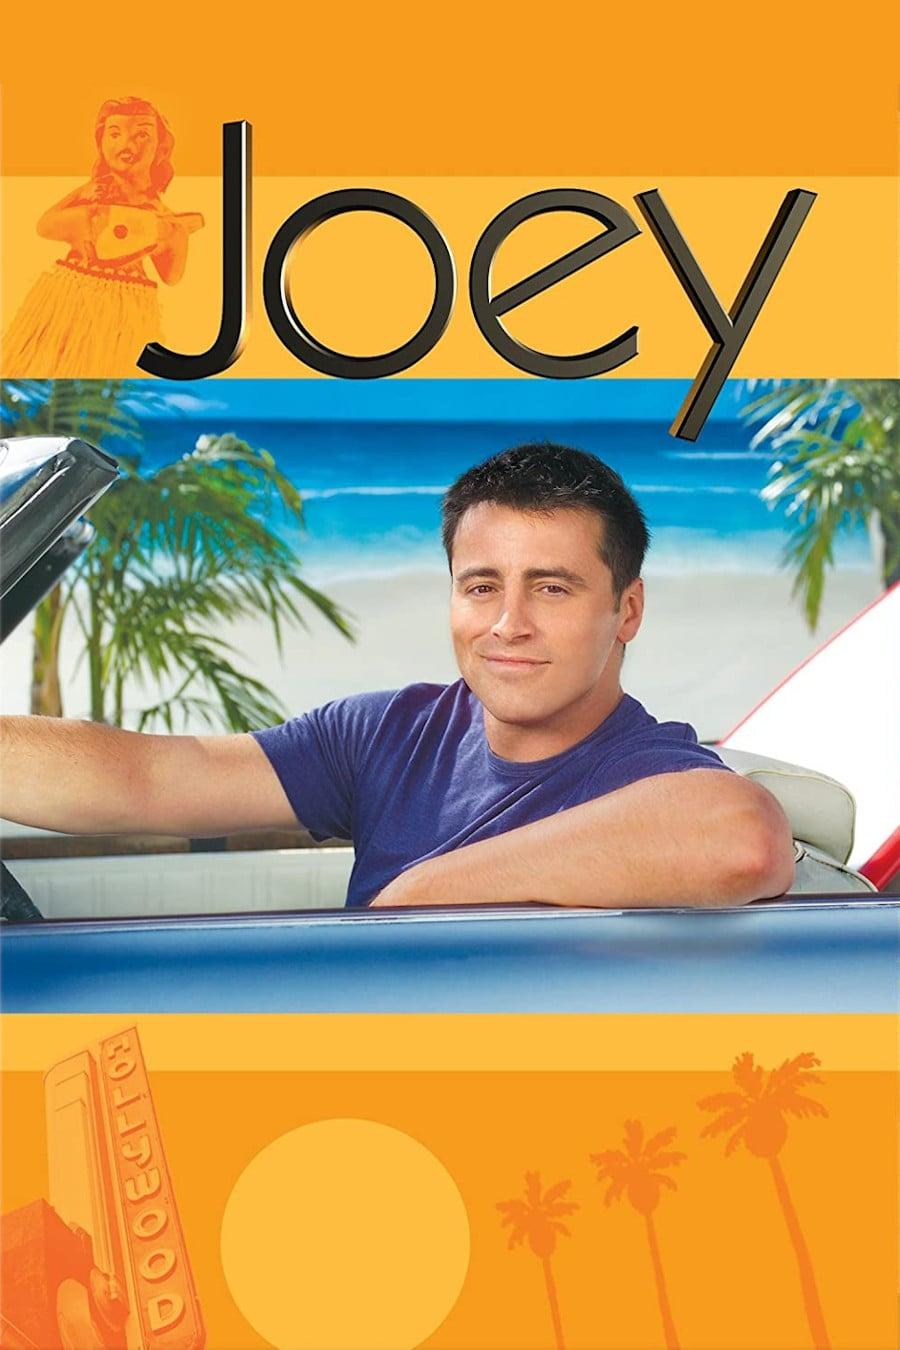 Joey poster